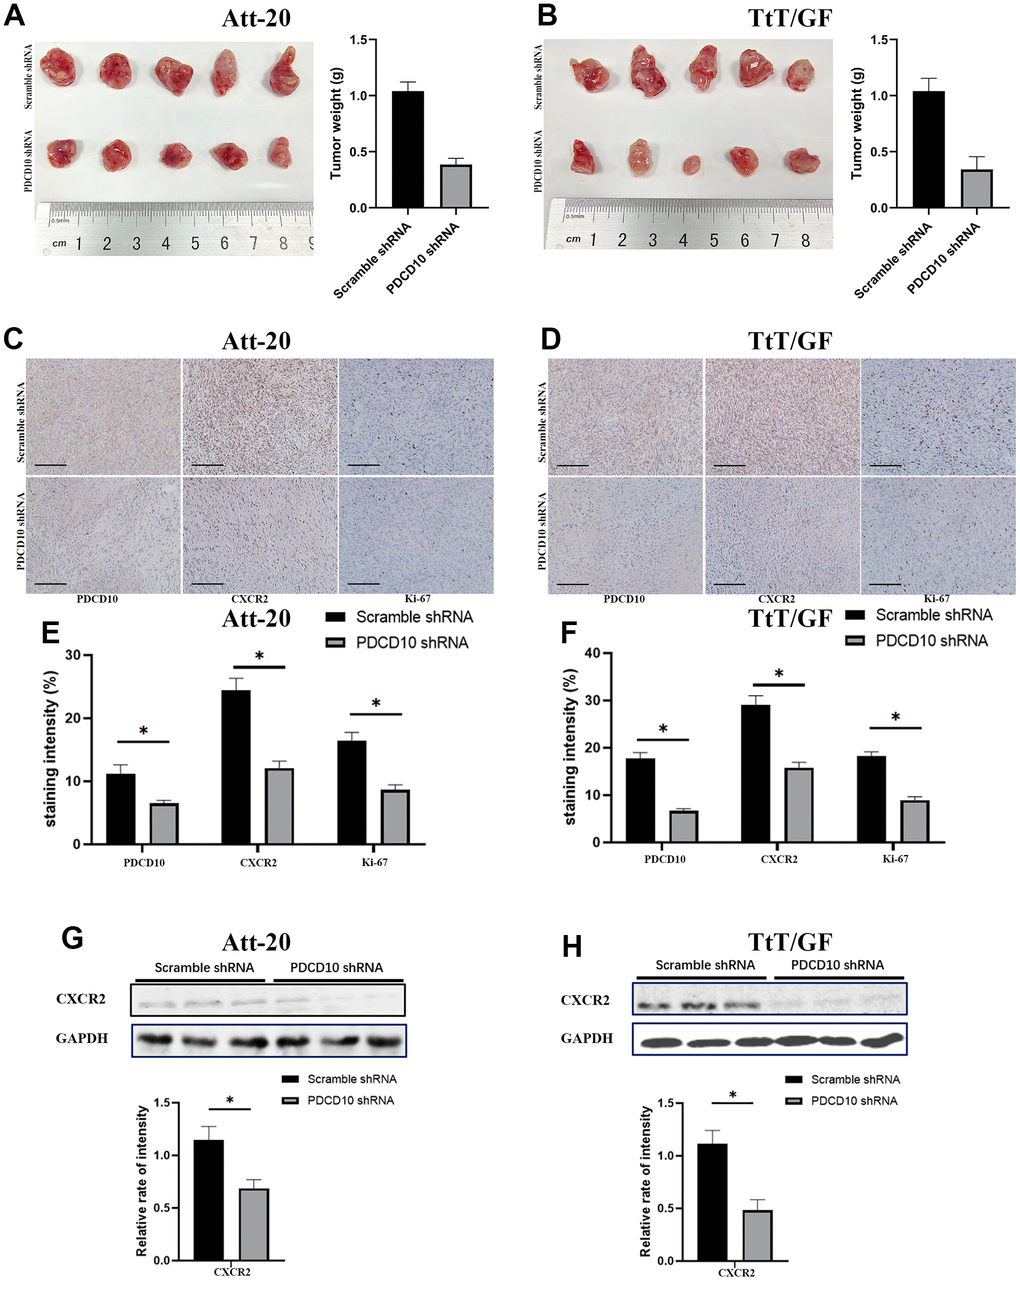 PDCD10 silencing impairs the tumorigenesis and reduces CXCR2 expression of PA cells in vivo. (A, B) Images for Att-20 and TtT/GF xenografts from nude mice (Left). Statistical analysis of xenograft tumor weights (Right). (C, D) Representative IHC images of Att-20 and TtT/GF xenograft tumor tissues for PDCD10, CXCR2 and Ki-67 staining (200x). Scale bars: 100μm. (E, F) Intensity of PDCD10, CXCR2 and Ki-67 staining were analyzed by IHC-Profiler. (G, H) Western blotting was performed to examine the expression of CXCR2 in Att-20 and TtT/GF xenograft tumor samples. Band intensities were quantified and normalized to GAPDH. * P 